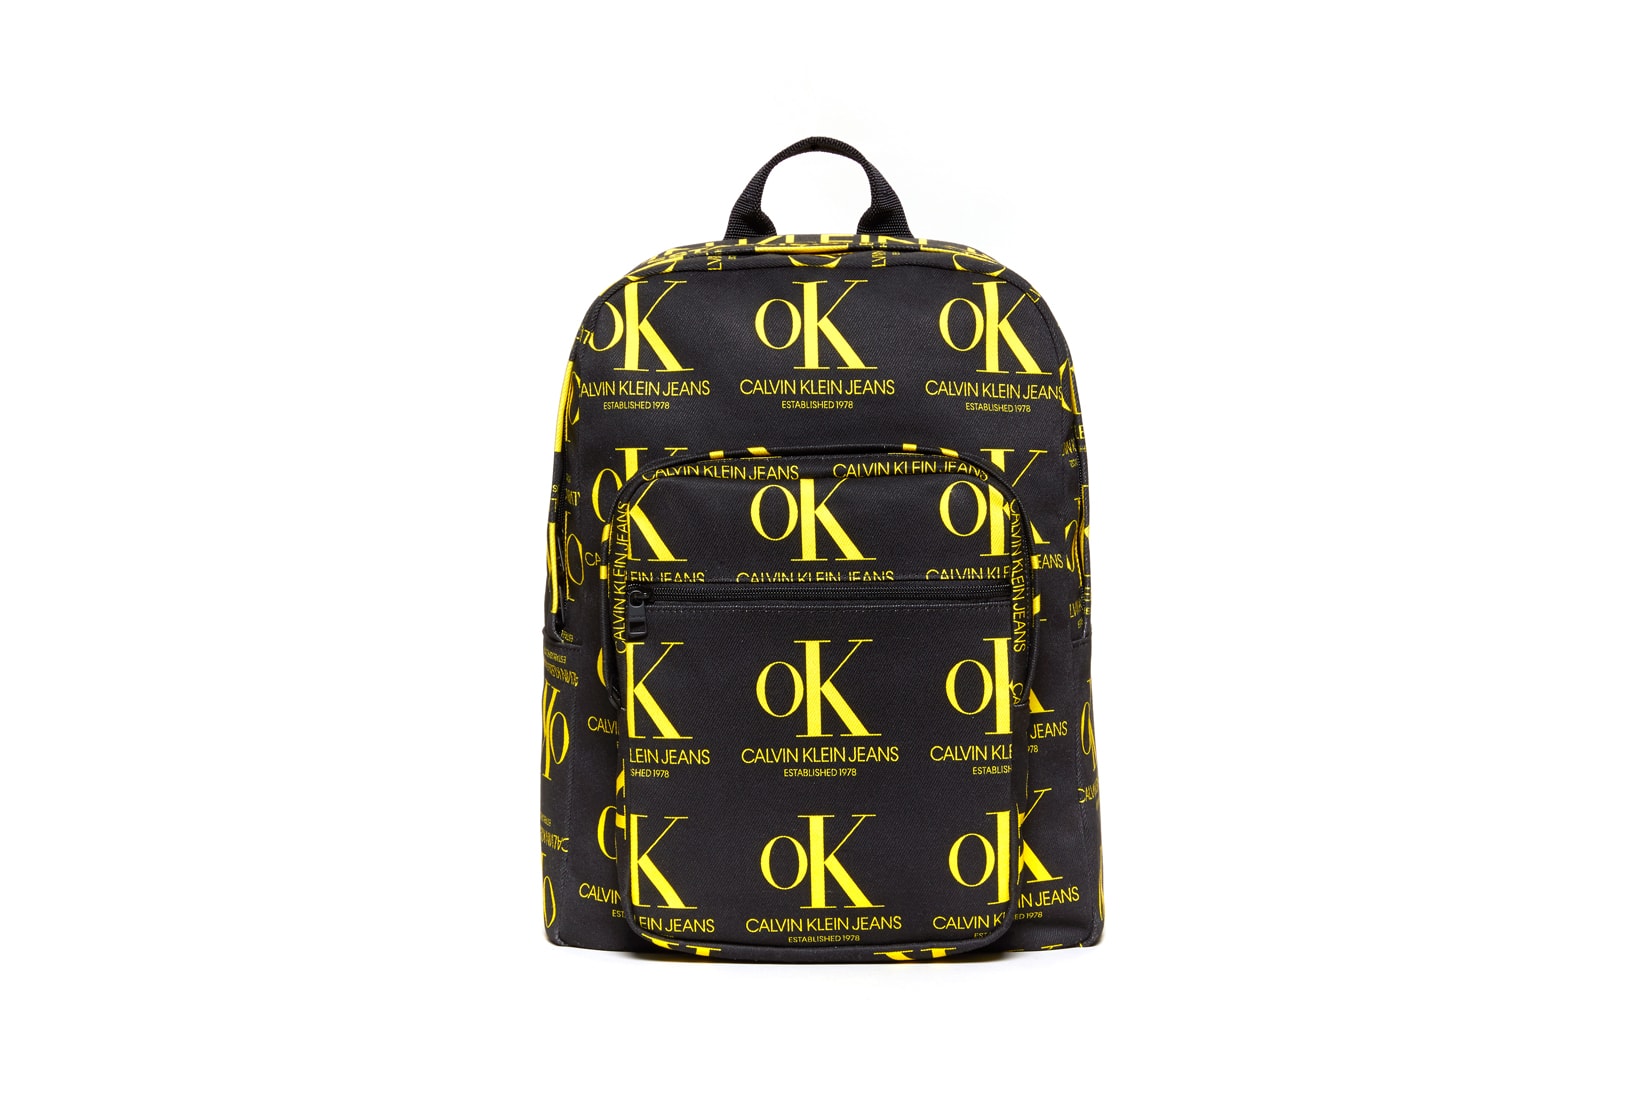 CALVIN KLEIN JEANS EST. 1978 Delivery 2 Drop 02 Backpack Black Yellow